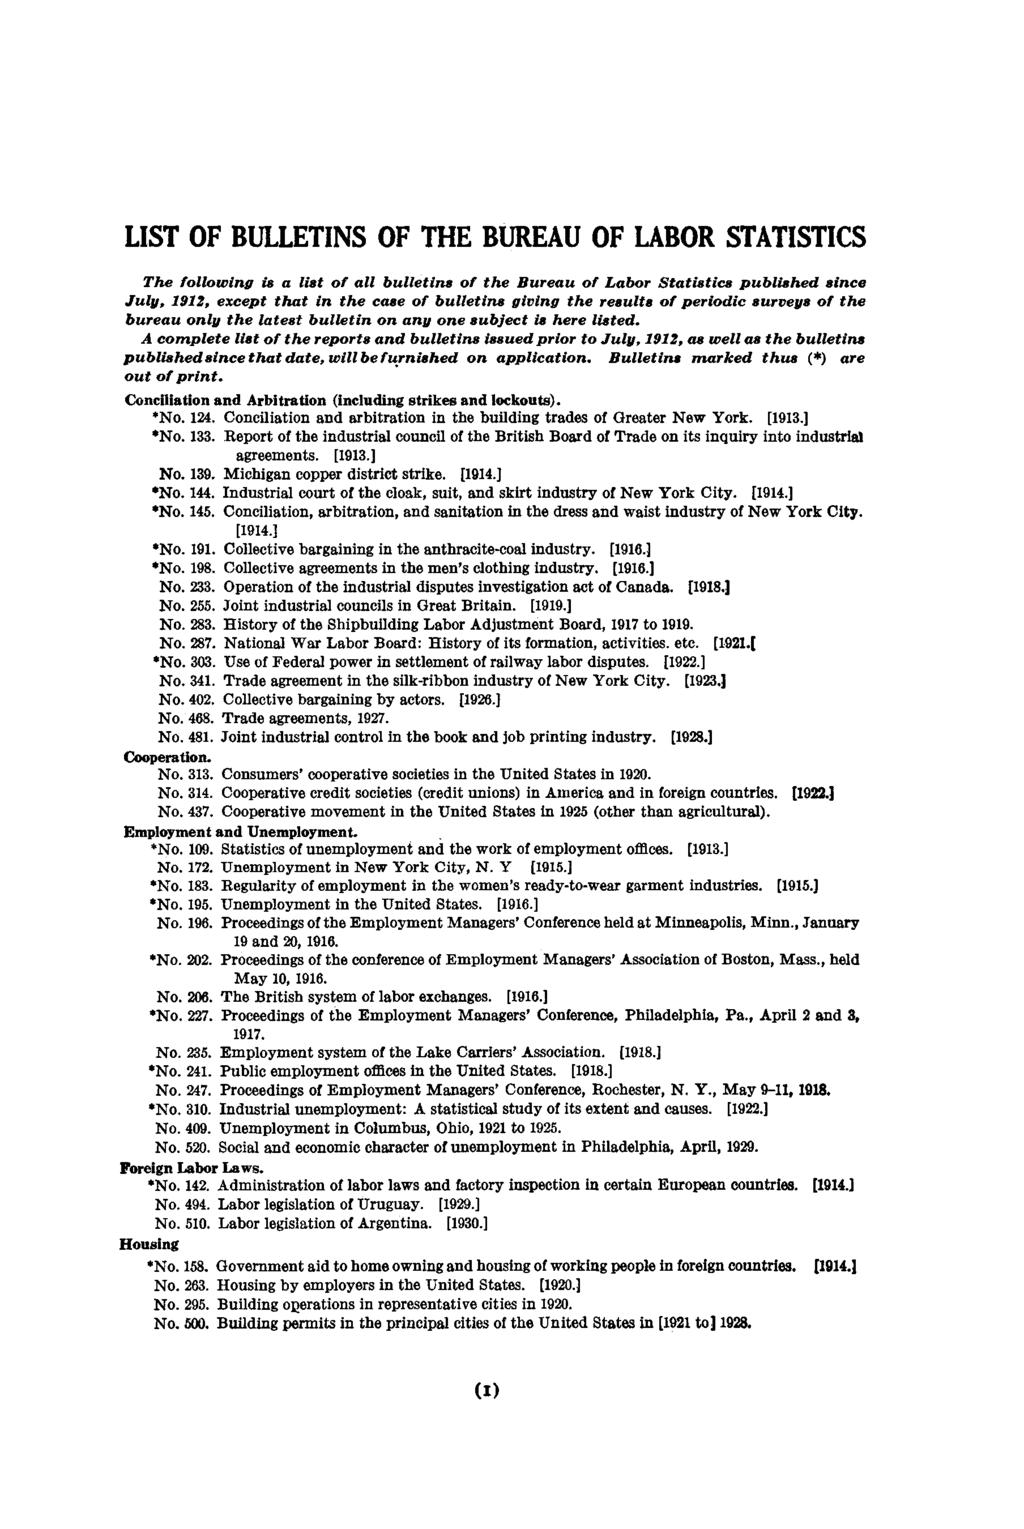 LIST OF BULLETINS OF THE BUREAU OF LABOR STATISTICS The following is a list of all bulletins of the Bureau of Labor Statistics published since July, 1912, except that in the case of bulletins giving